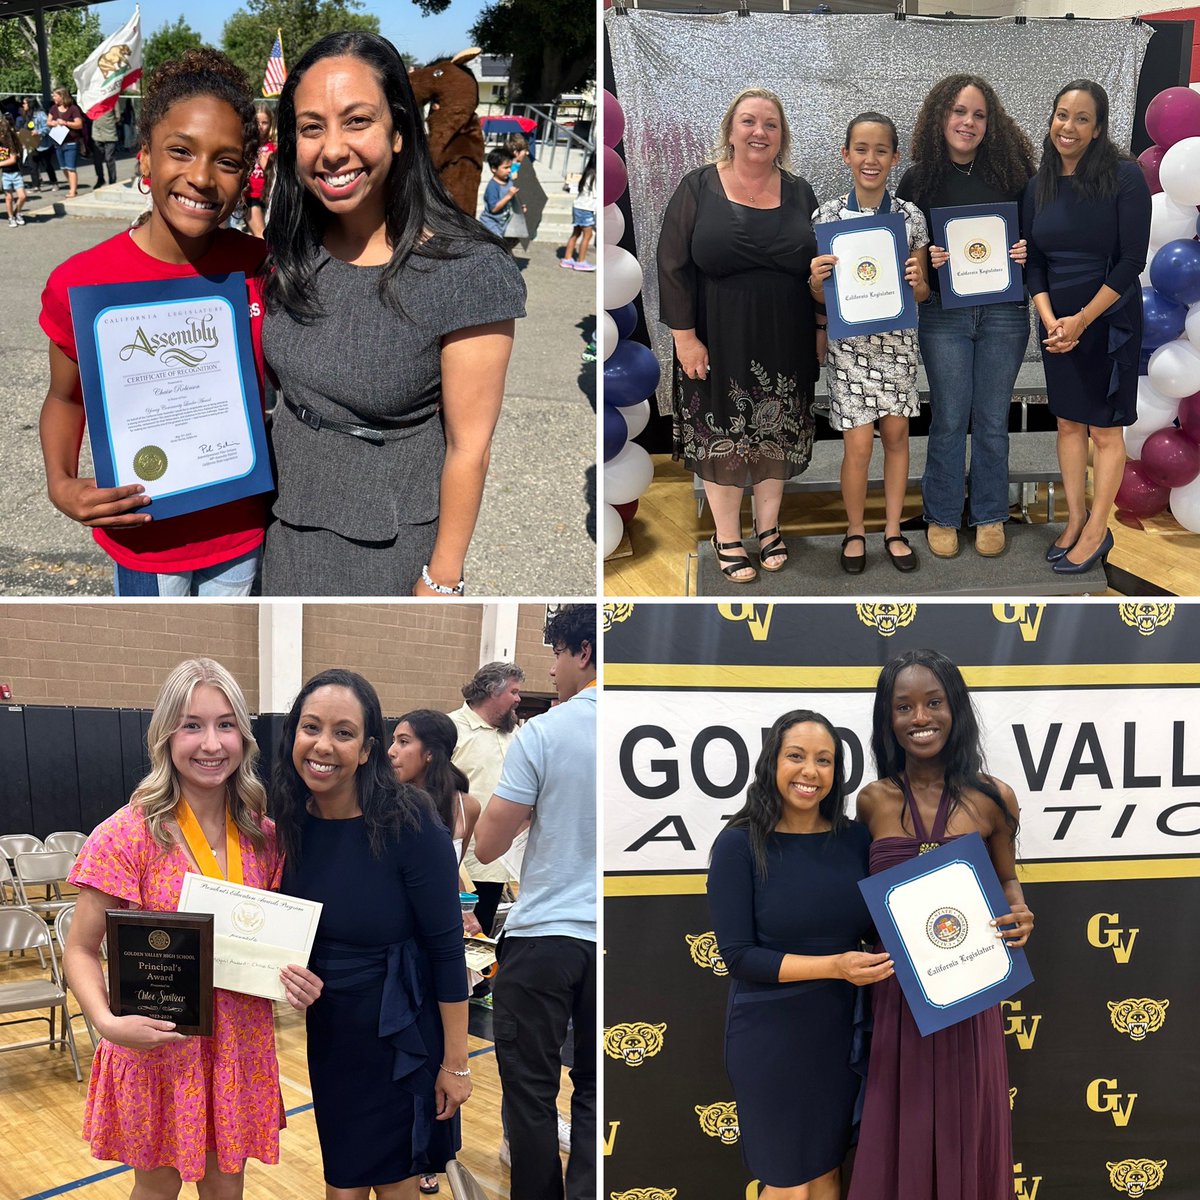 Team Pilar had the privilege of recognizing the amazing students at Live Oak Elementary, Lawrence Middle School, Rio Norte Junior High, Sulphur Springs Community School, and Golden Valley High School with our Young Community Leader Awards! 🌟 

It was an honor to celebrate these